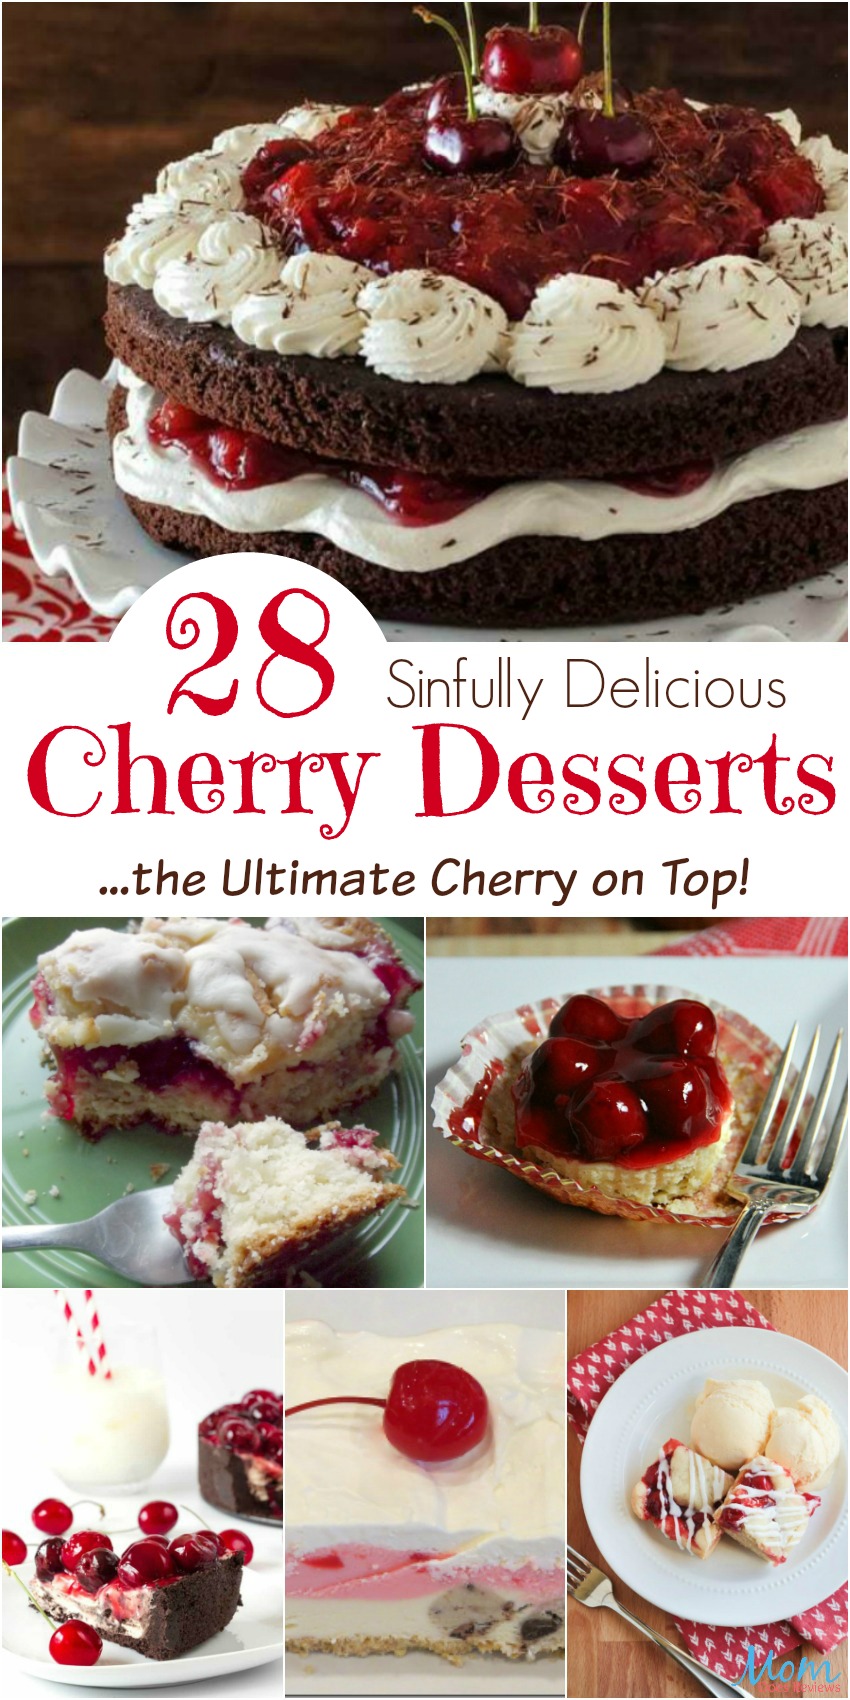 28 Sinfully Delicious Cherry Desserts that is the Ultimate Cherry on Top